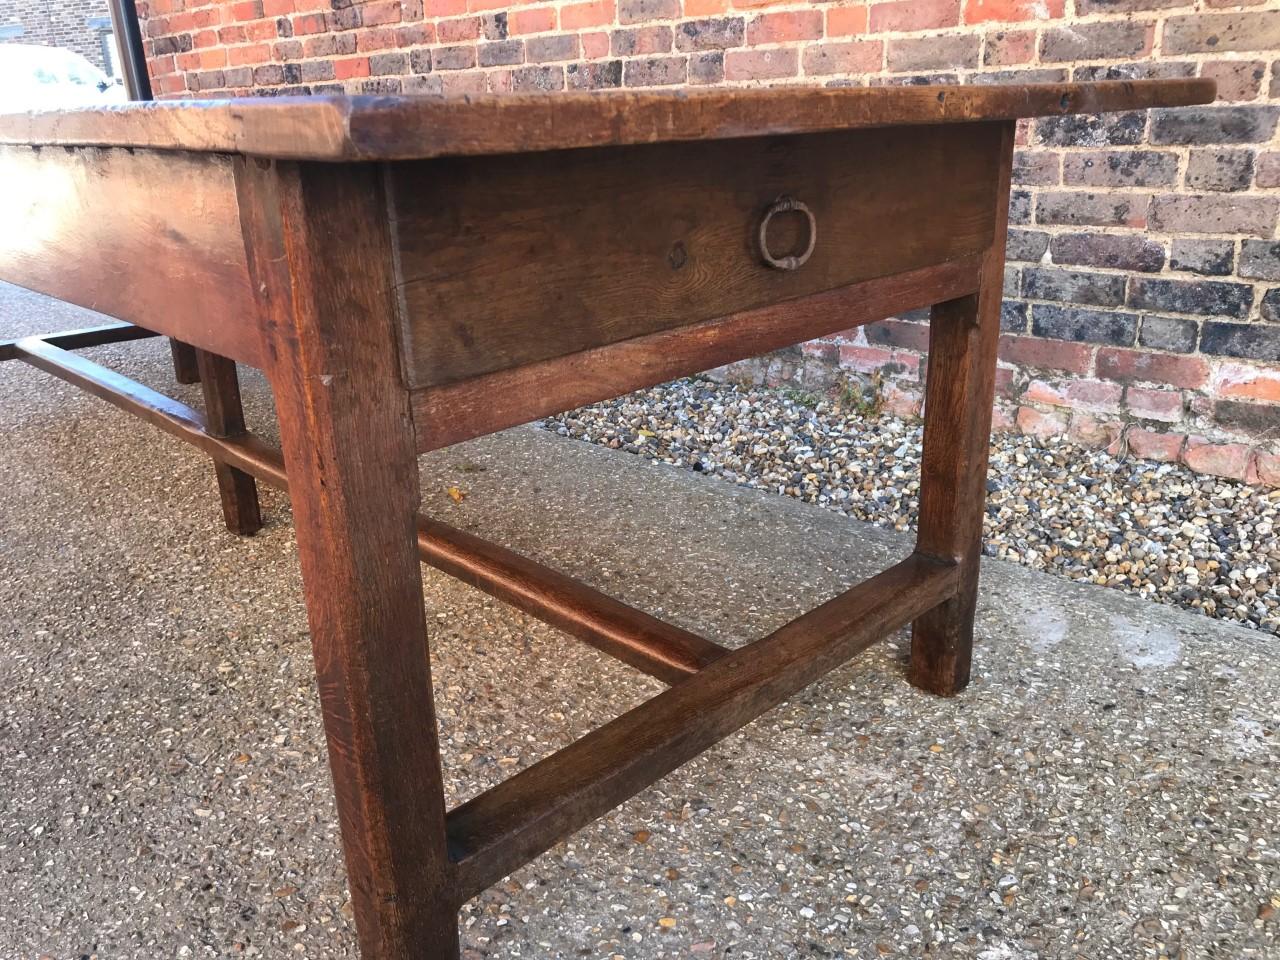 Rare large 18th century oak dining table with exceptional color and patination. This table has the most exquisite top and wonderful proportions. The width alone on this table is rare. The table stands on square end stretchers with a centre